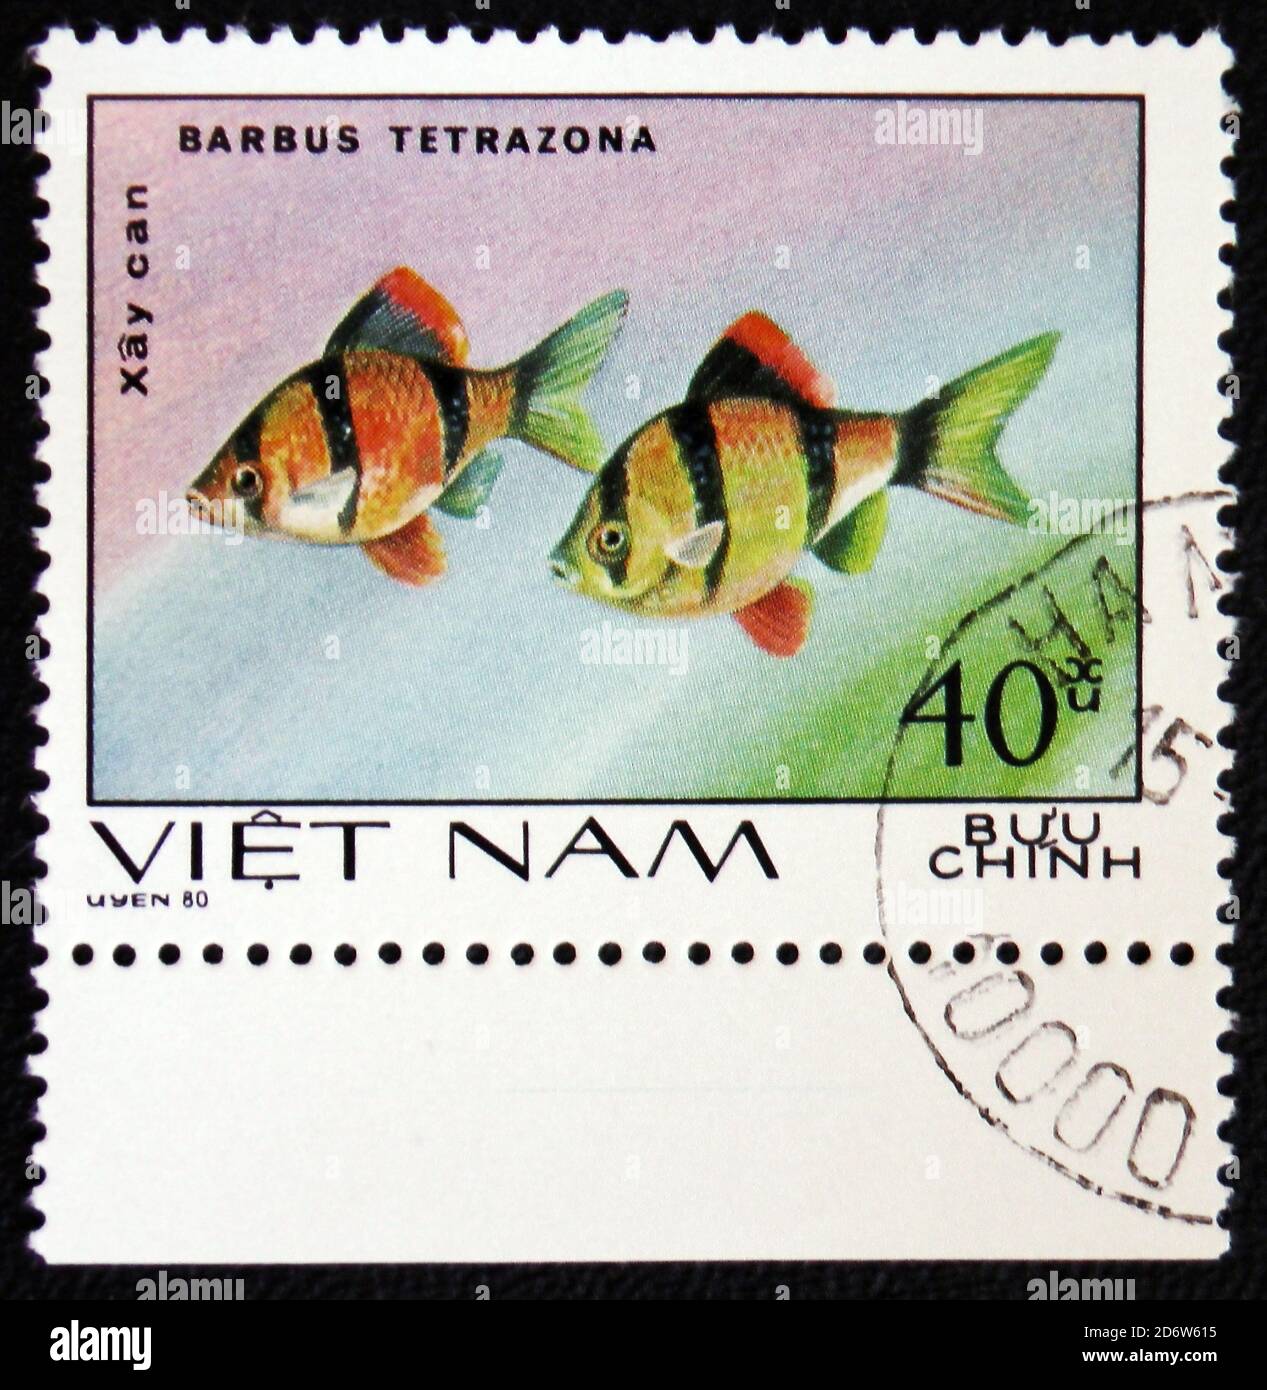 MOSCOW, RUSSIA - JANUARY 7, 2017: A stamp printed in Vietnam, shows fishes Barbus Tetrazona, Ornamental Fish, circa 1980 Stock Photo